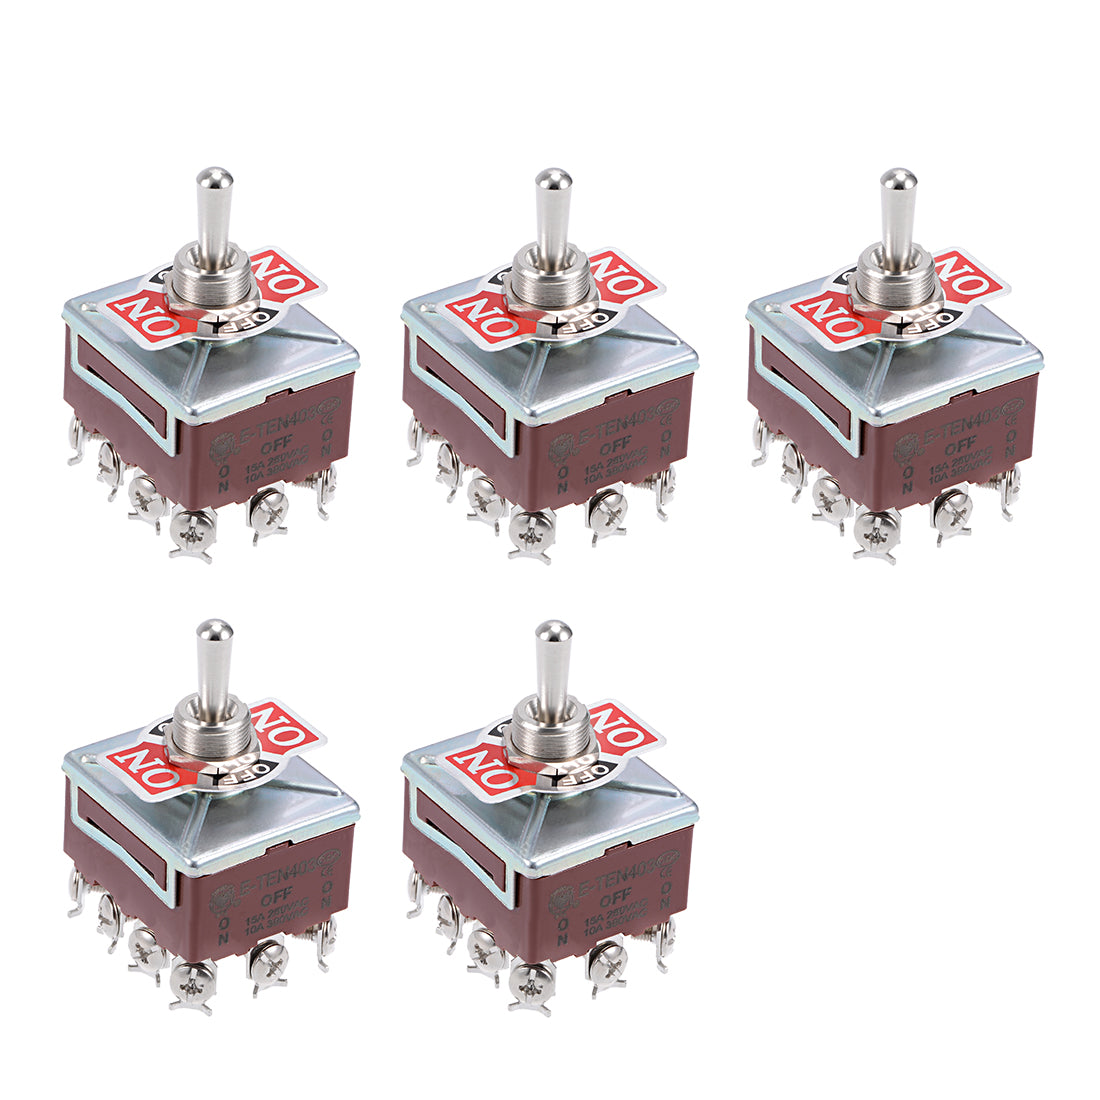 uxcell Uxcell 4PDT Lacthing Rocker Toggle Switch Heavy-Duty 10A 380V 15A 250V 12P ON/OFF/ON Metal Bat 5pcs